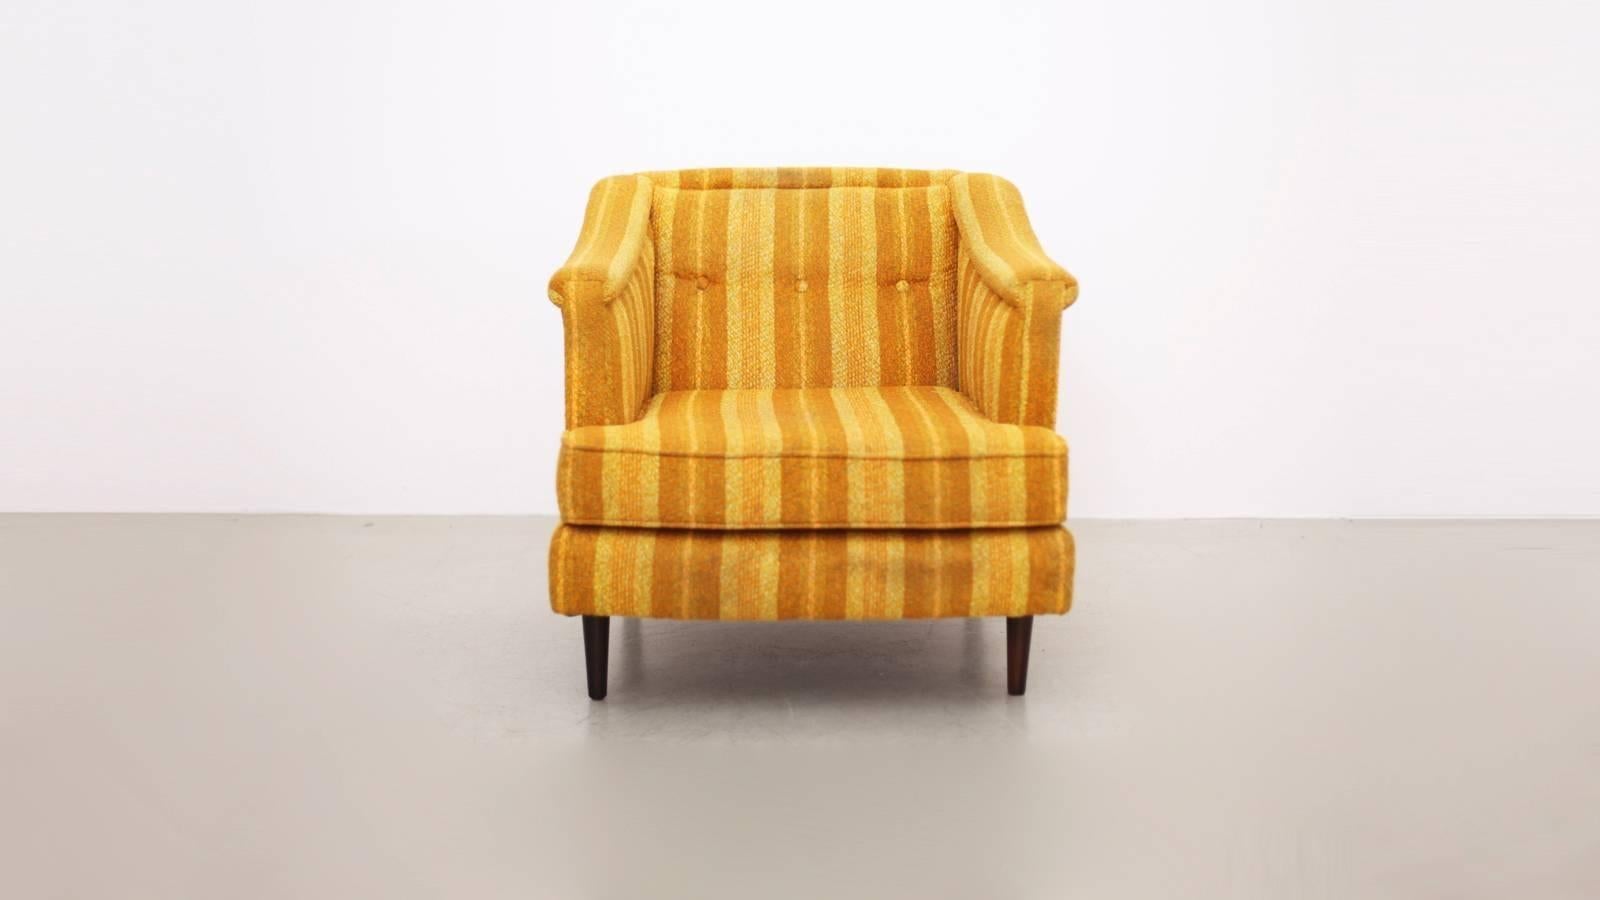 North American Edward Wormley Yellow Lounge Chair for Dunbar, Reupholstery Needed For Sale